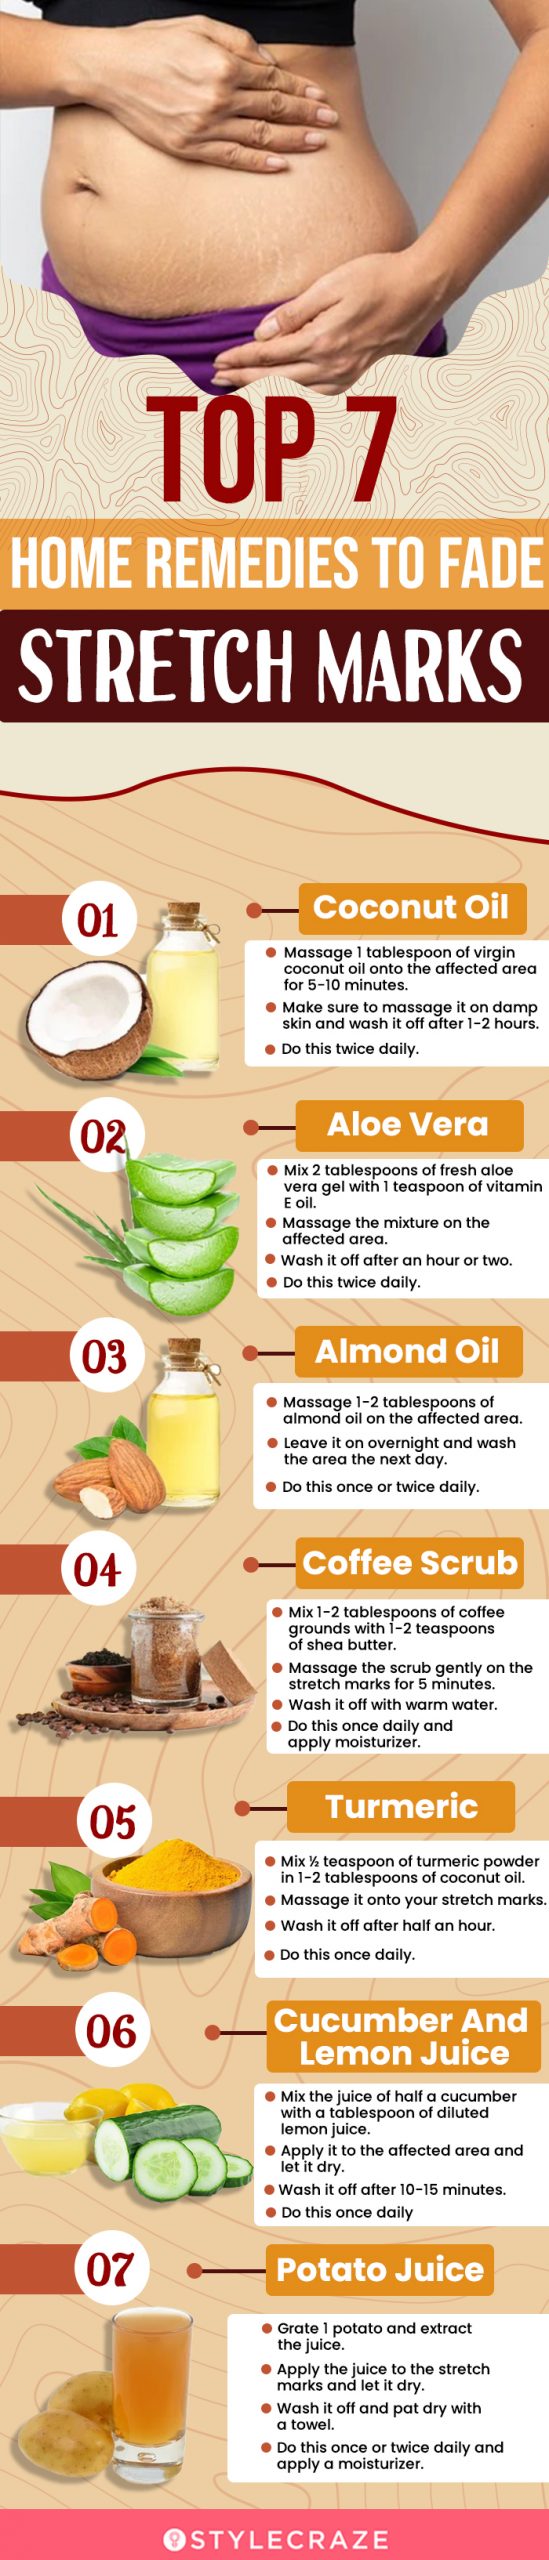 top 7 home remedies to fade stretch marks and how to use them(infographic)